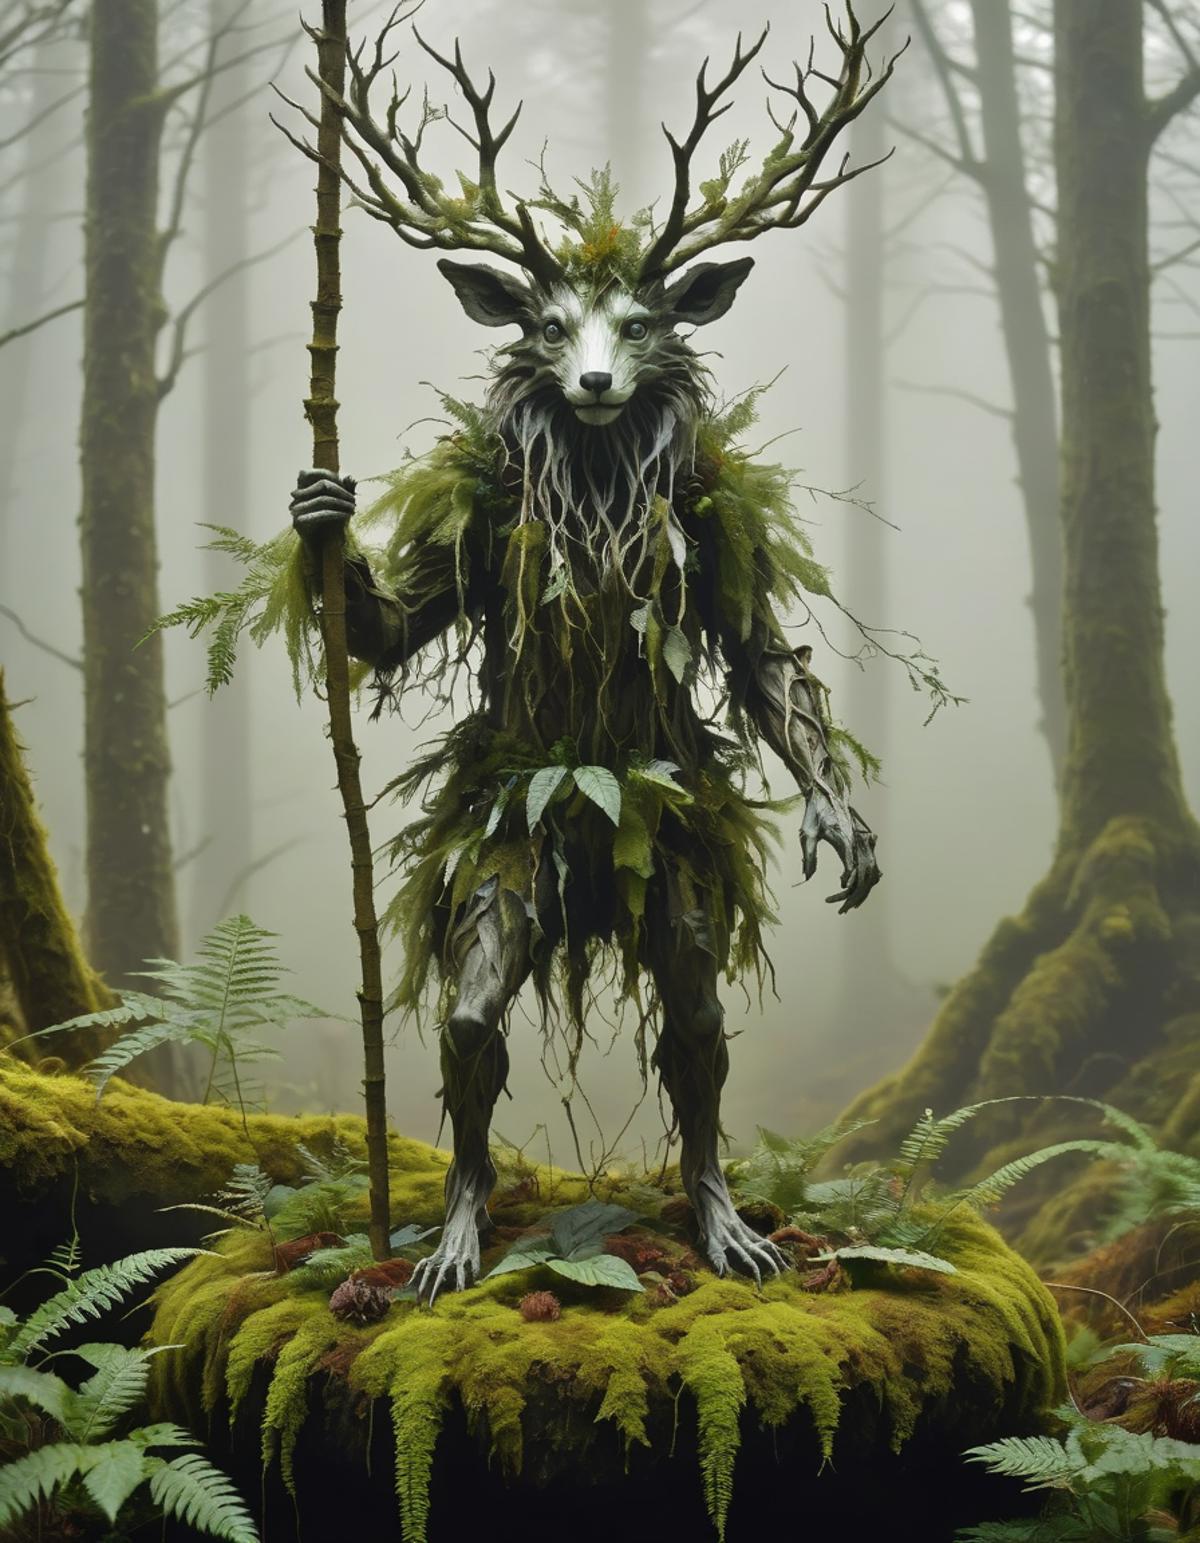 A forest scene with a creature holding a staff and surrounded by greenery.